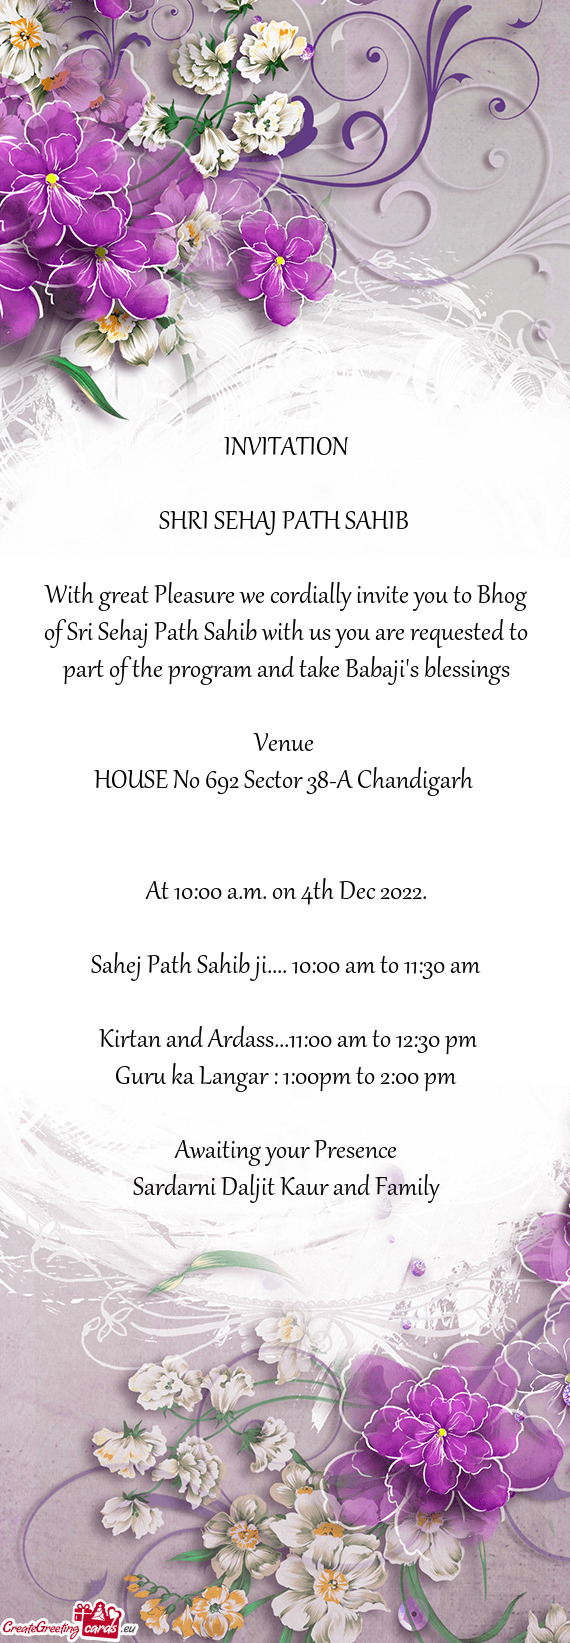 With great Pleasure we cordially invite you to Bhog of Sri Sehaj Path Sahib with us you are requeste